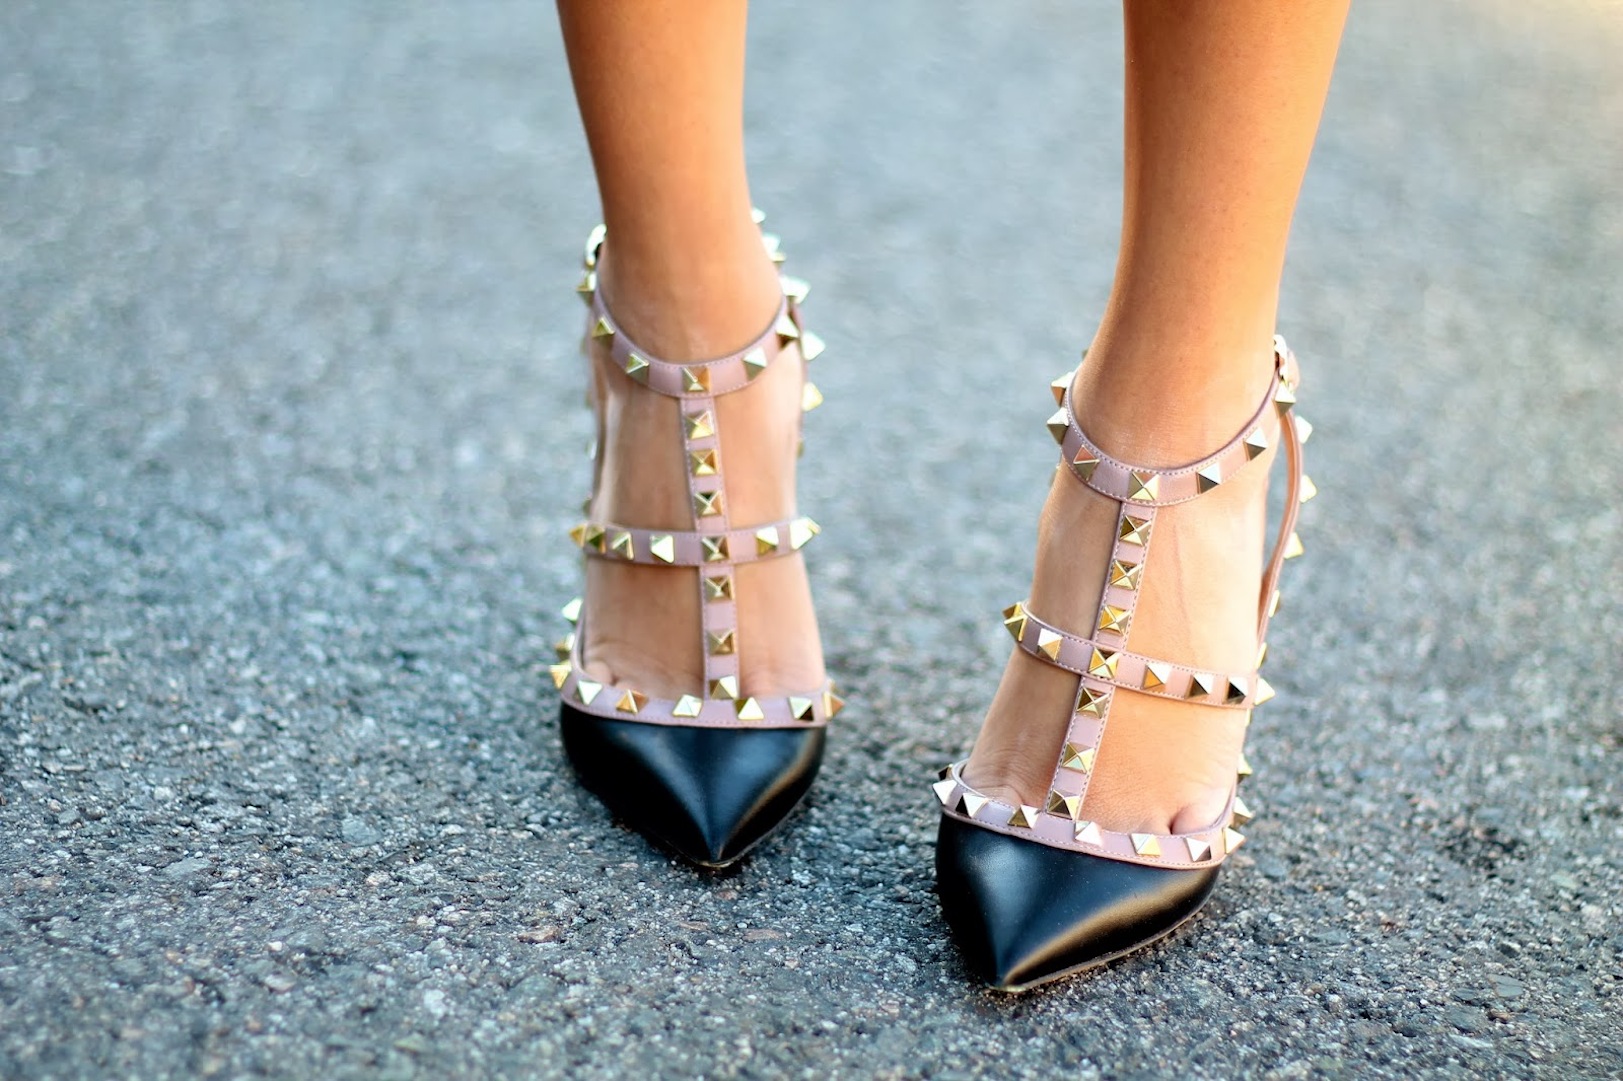 tigger På jorden lov Answers : How can you tell if Valentino Rockstud heels are fake?